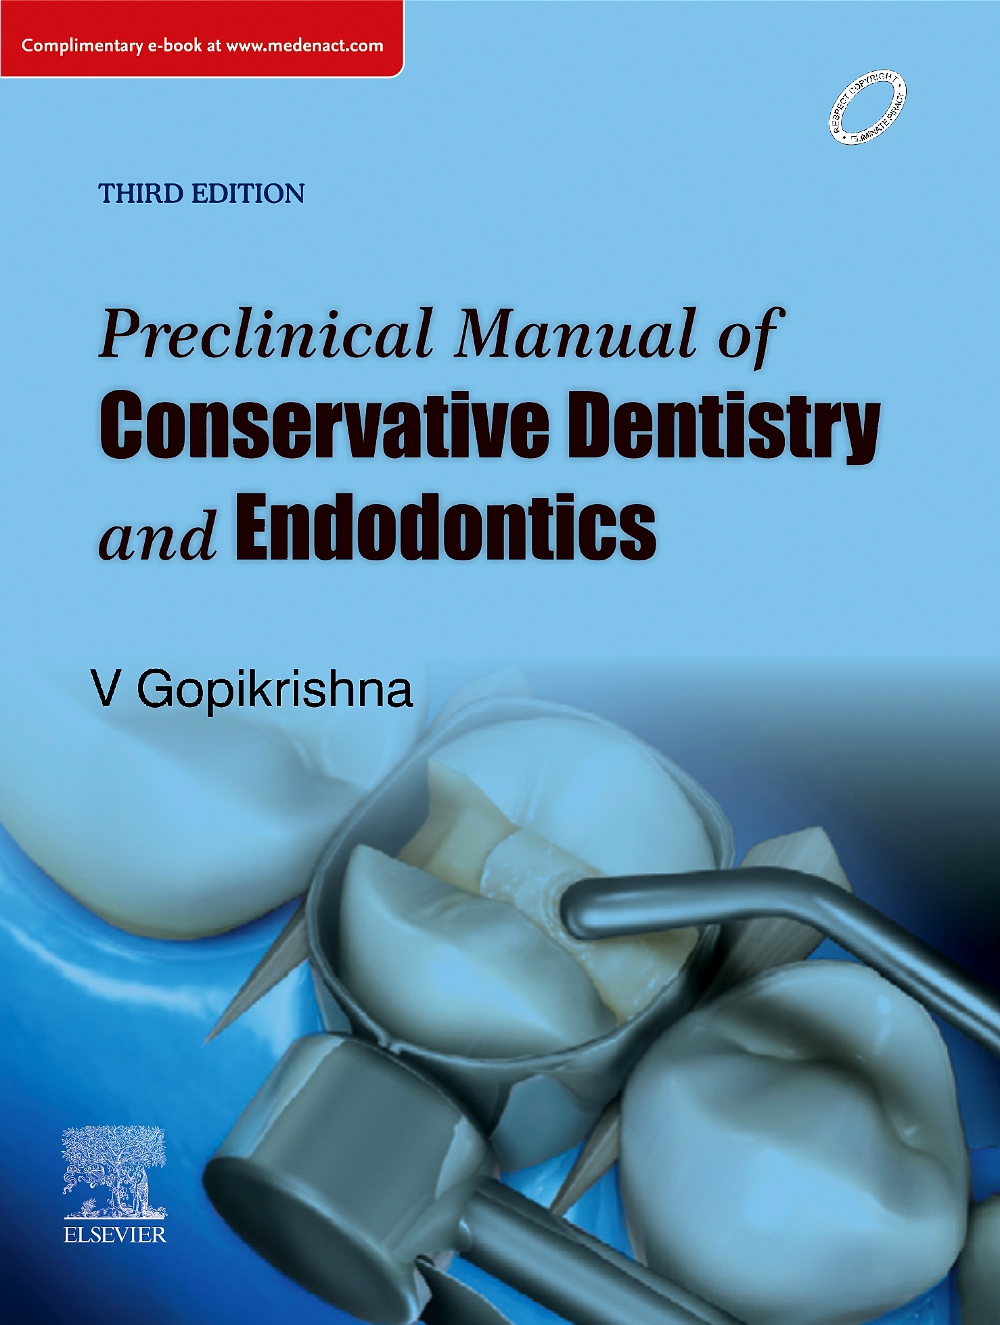 Preclinical Manual Of Conservative Dentistry And Endodontics, 3E (Old Edition)